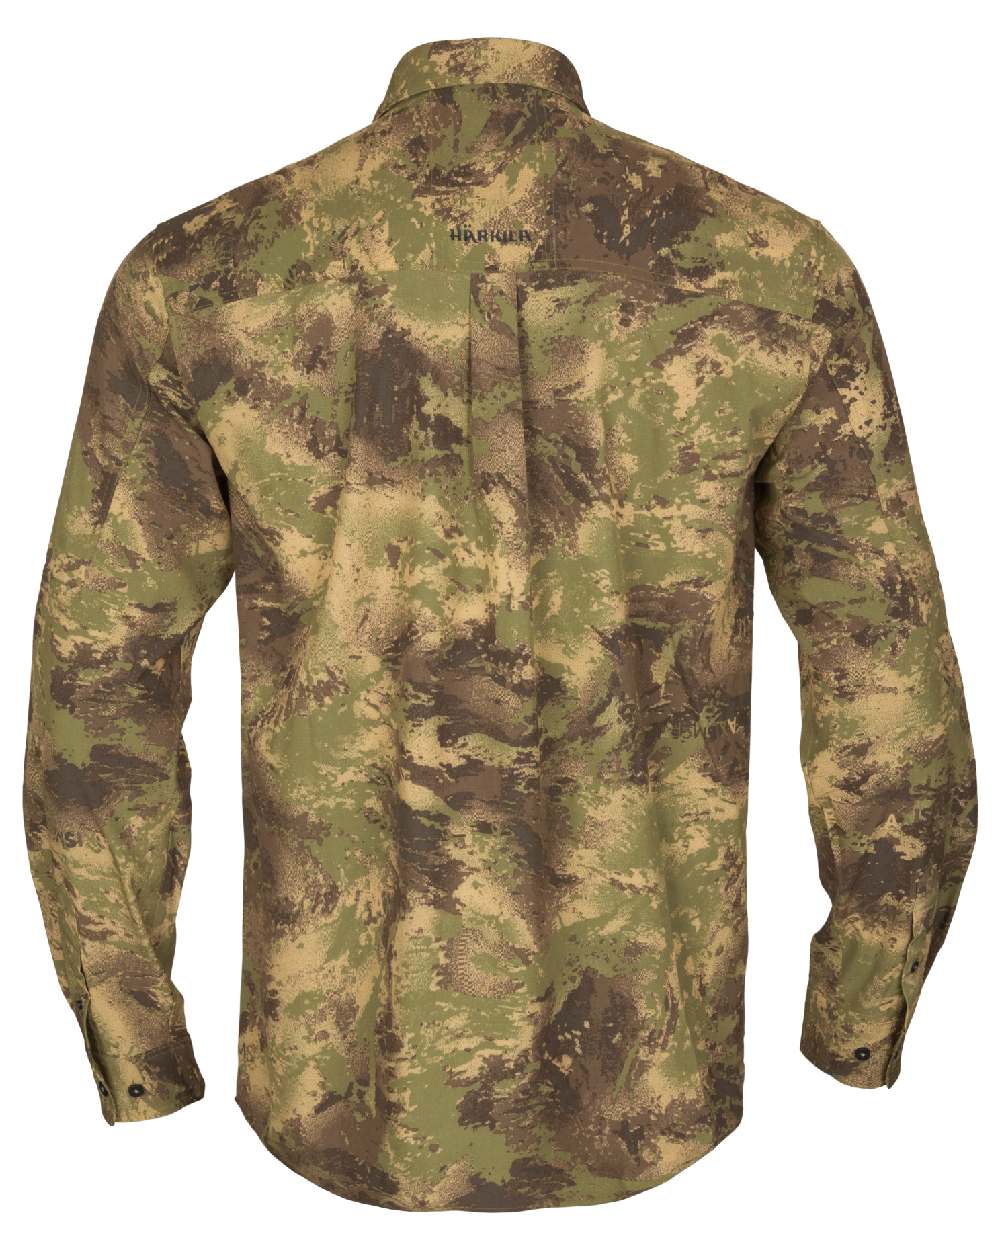 AXIS Forest coloured Harkila Deer Stalker Camo Long Sleeve Shirt bacl on white background